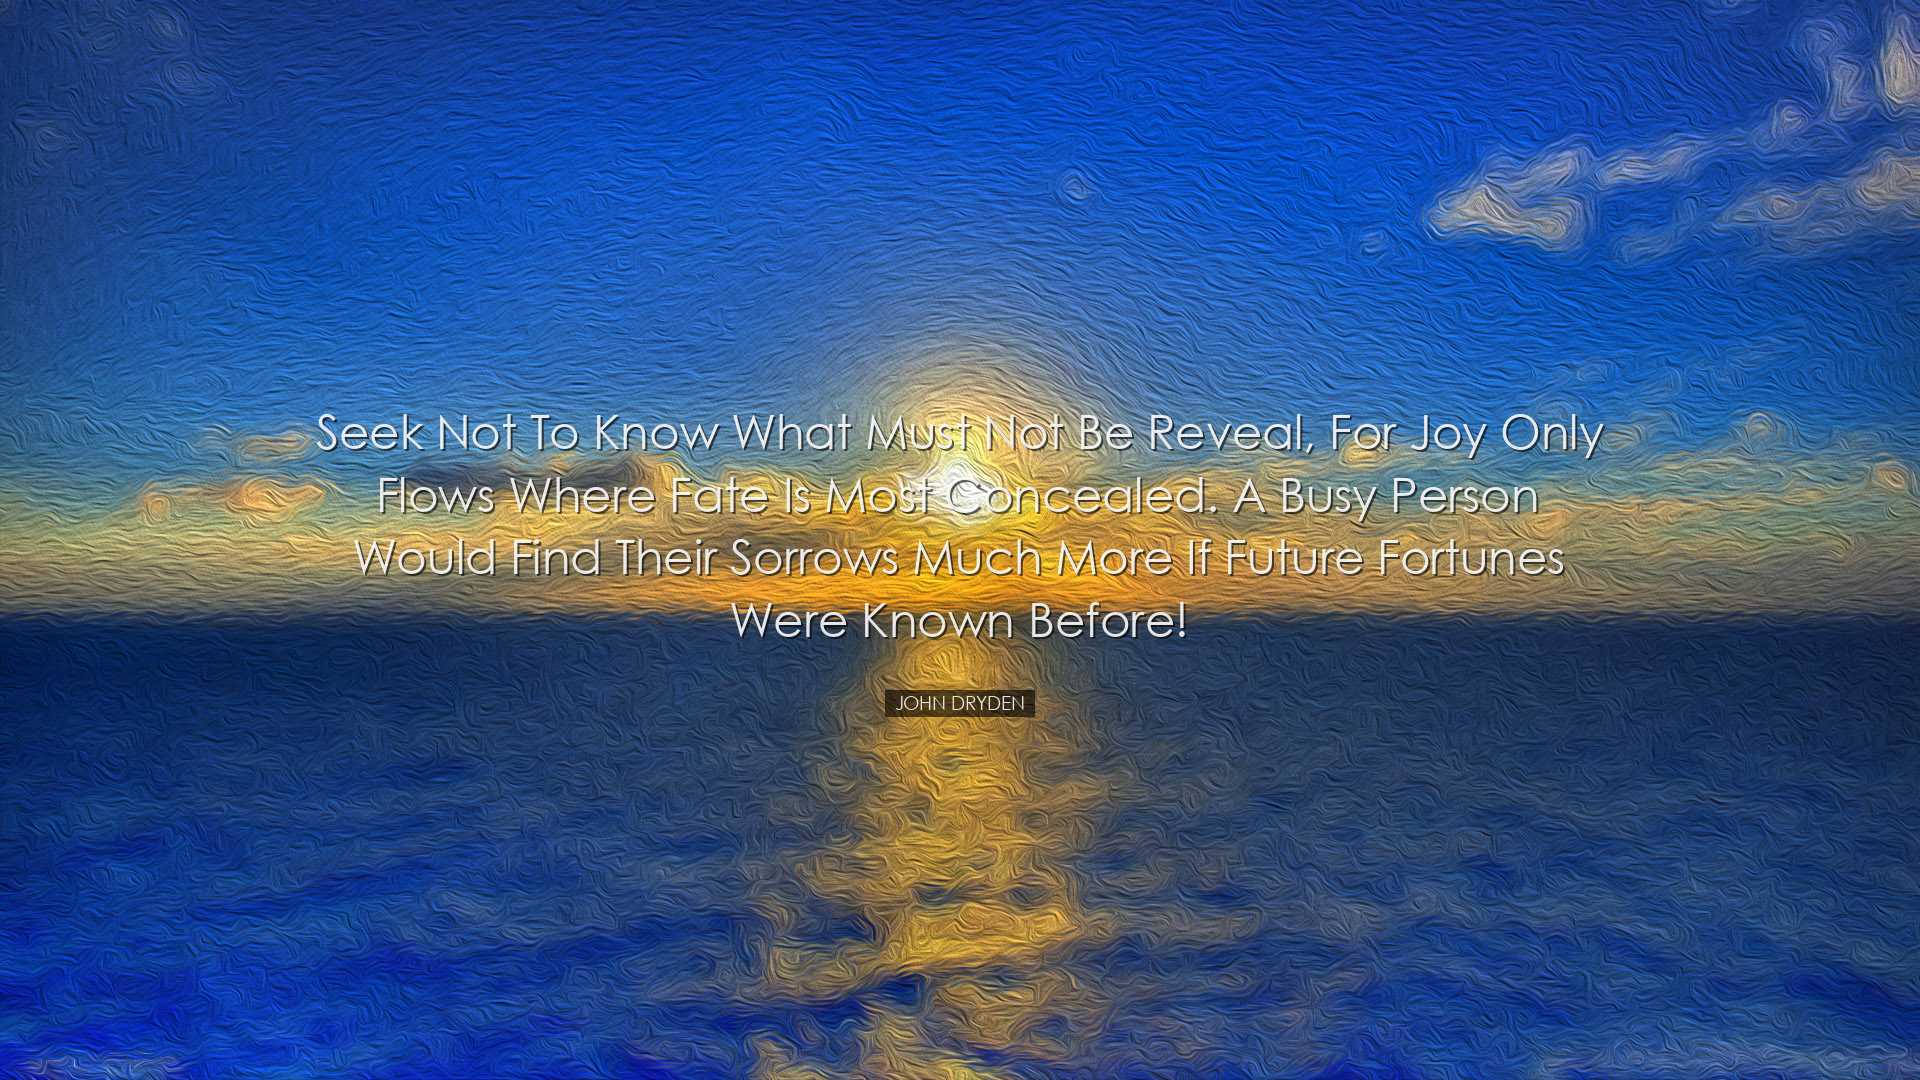 Seek not to know what must not be reveal, for joy only flows where